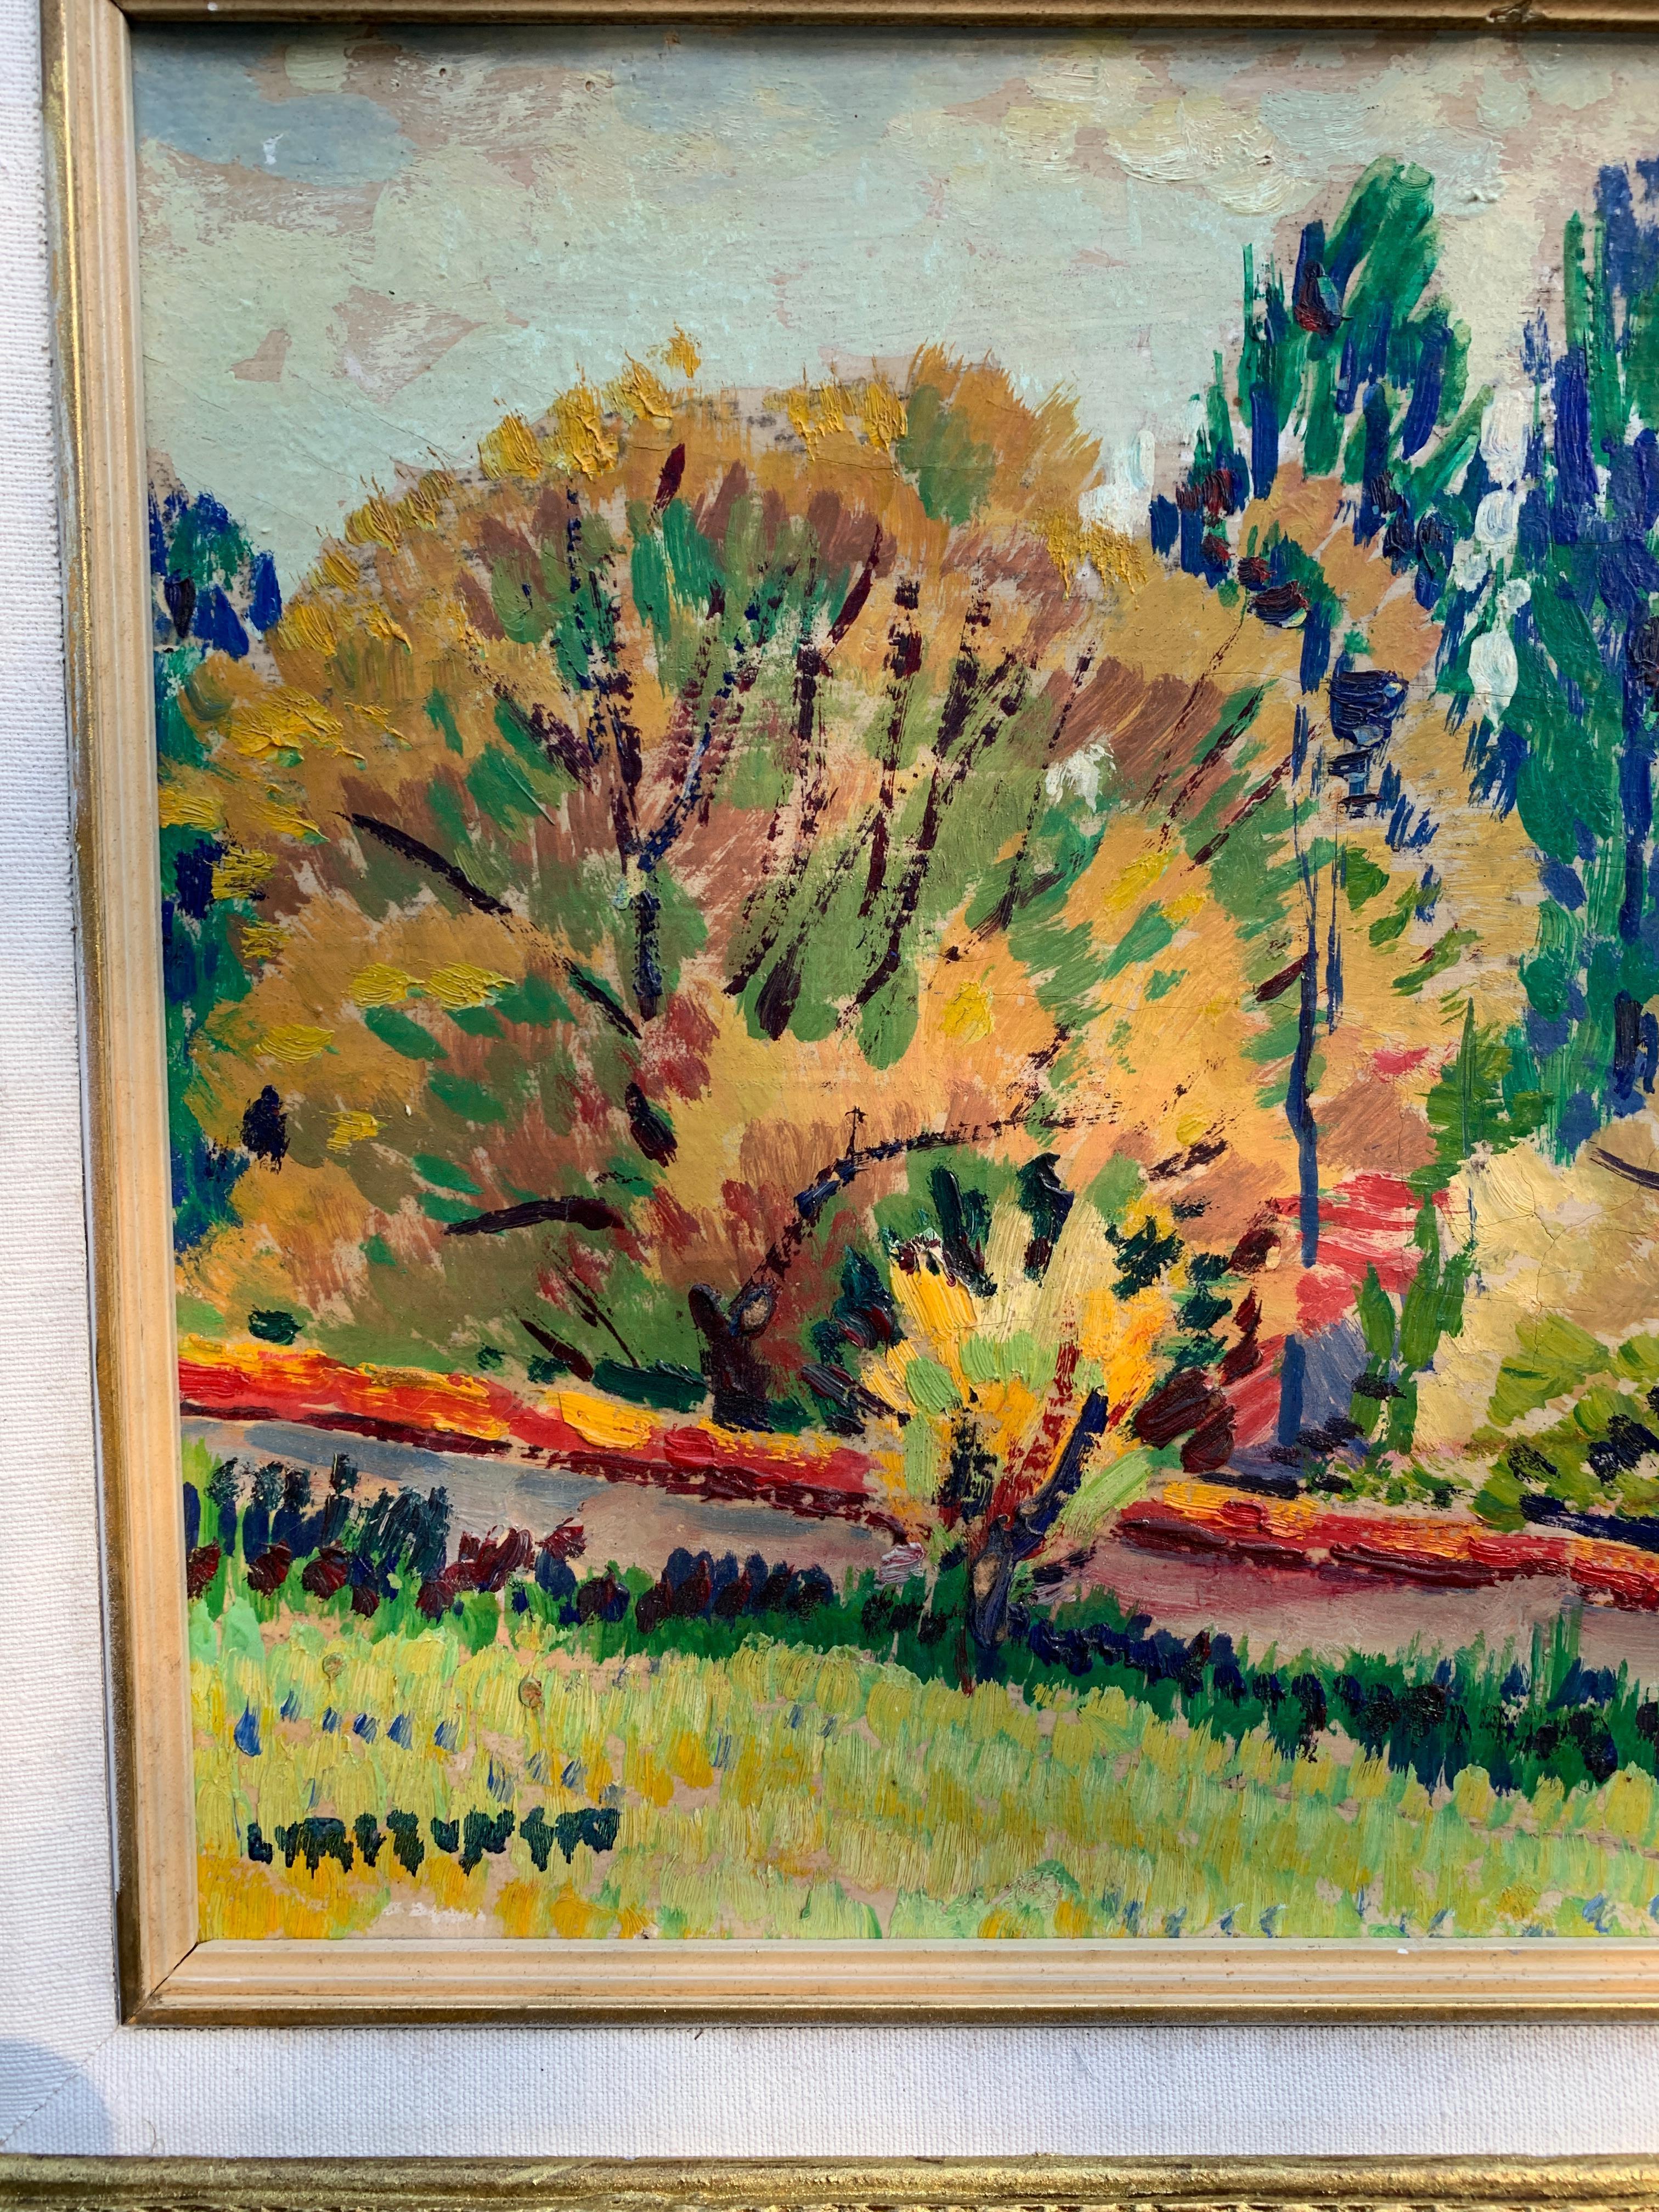 Mid Century French/European school, impressionist landscape with trees - Painting by Unknown